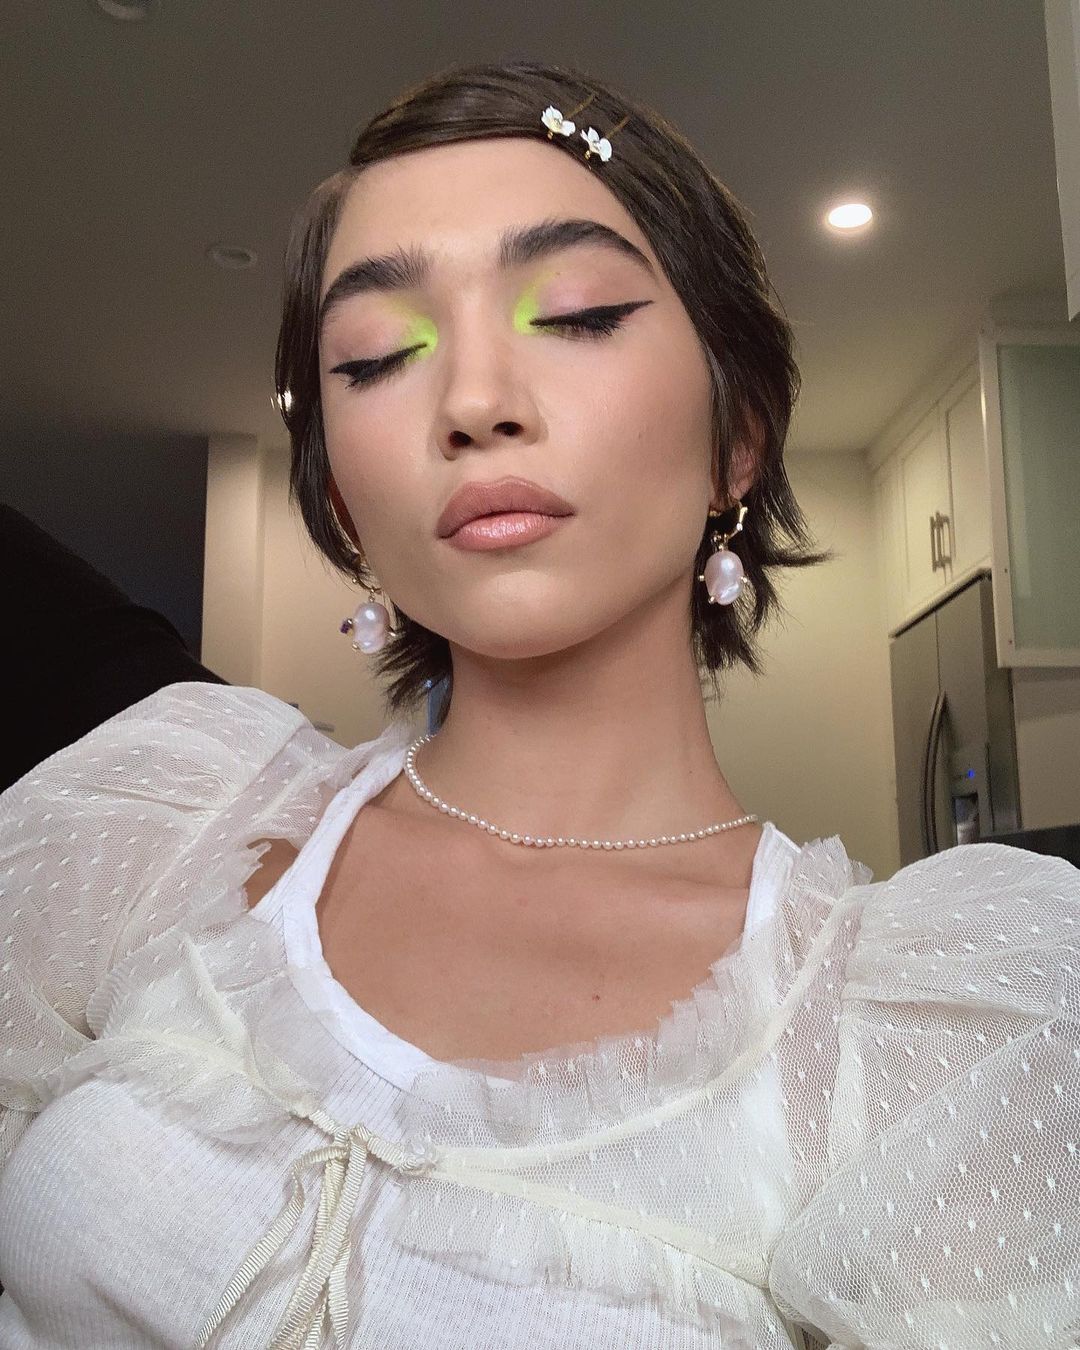 Hair Trends 2021: @rowanblanchard's choppy tapered haircut has become her signature